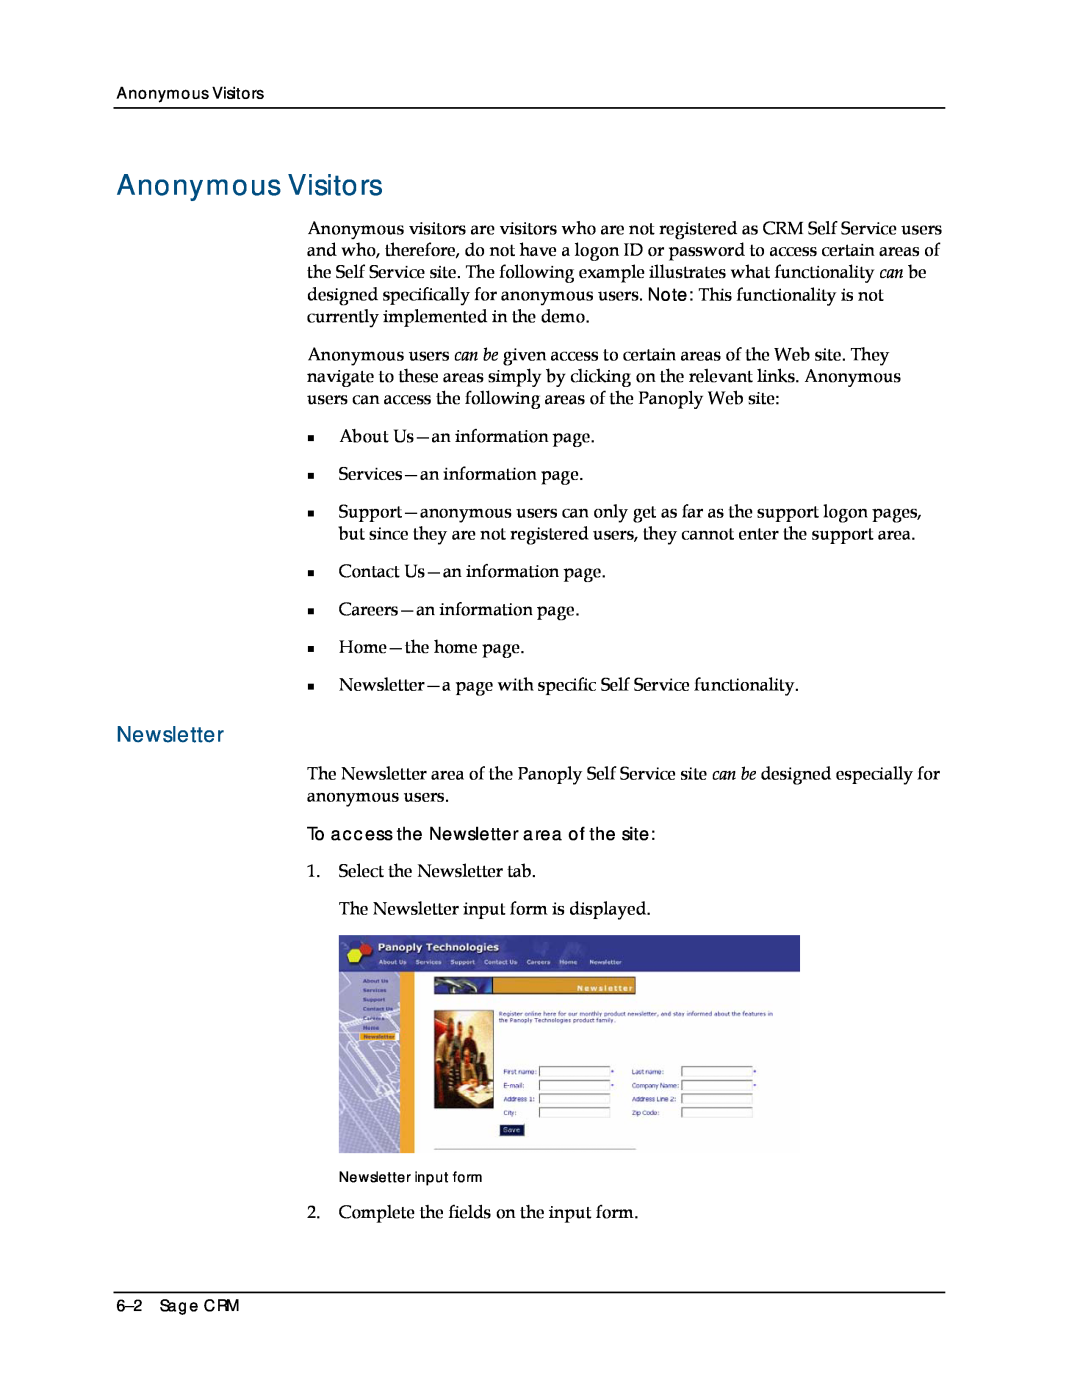 Sage Software 5.8 manual Anonymous Visitors, Newsletter 